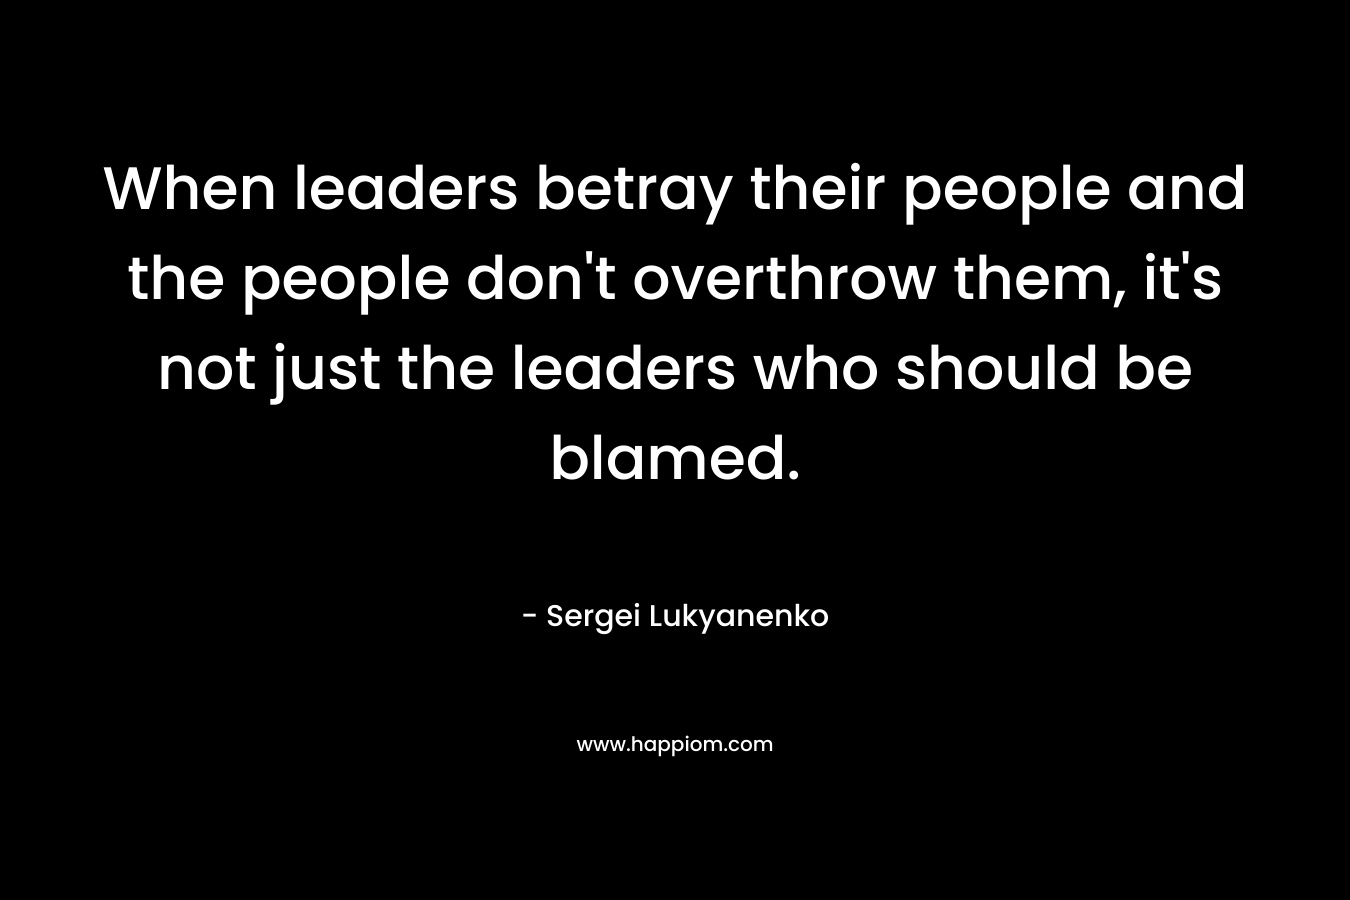 When leaders betray their people and the people don't overthrow them, it's not just the leaders who should be blamed.